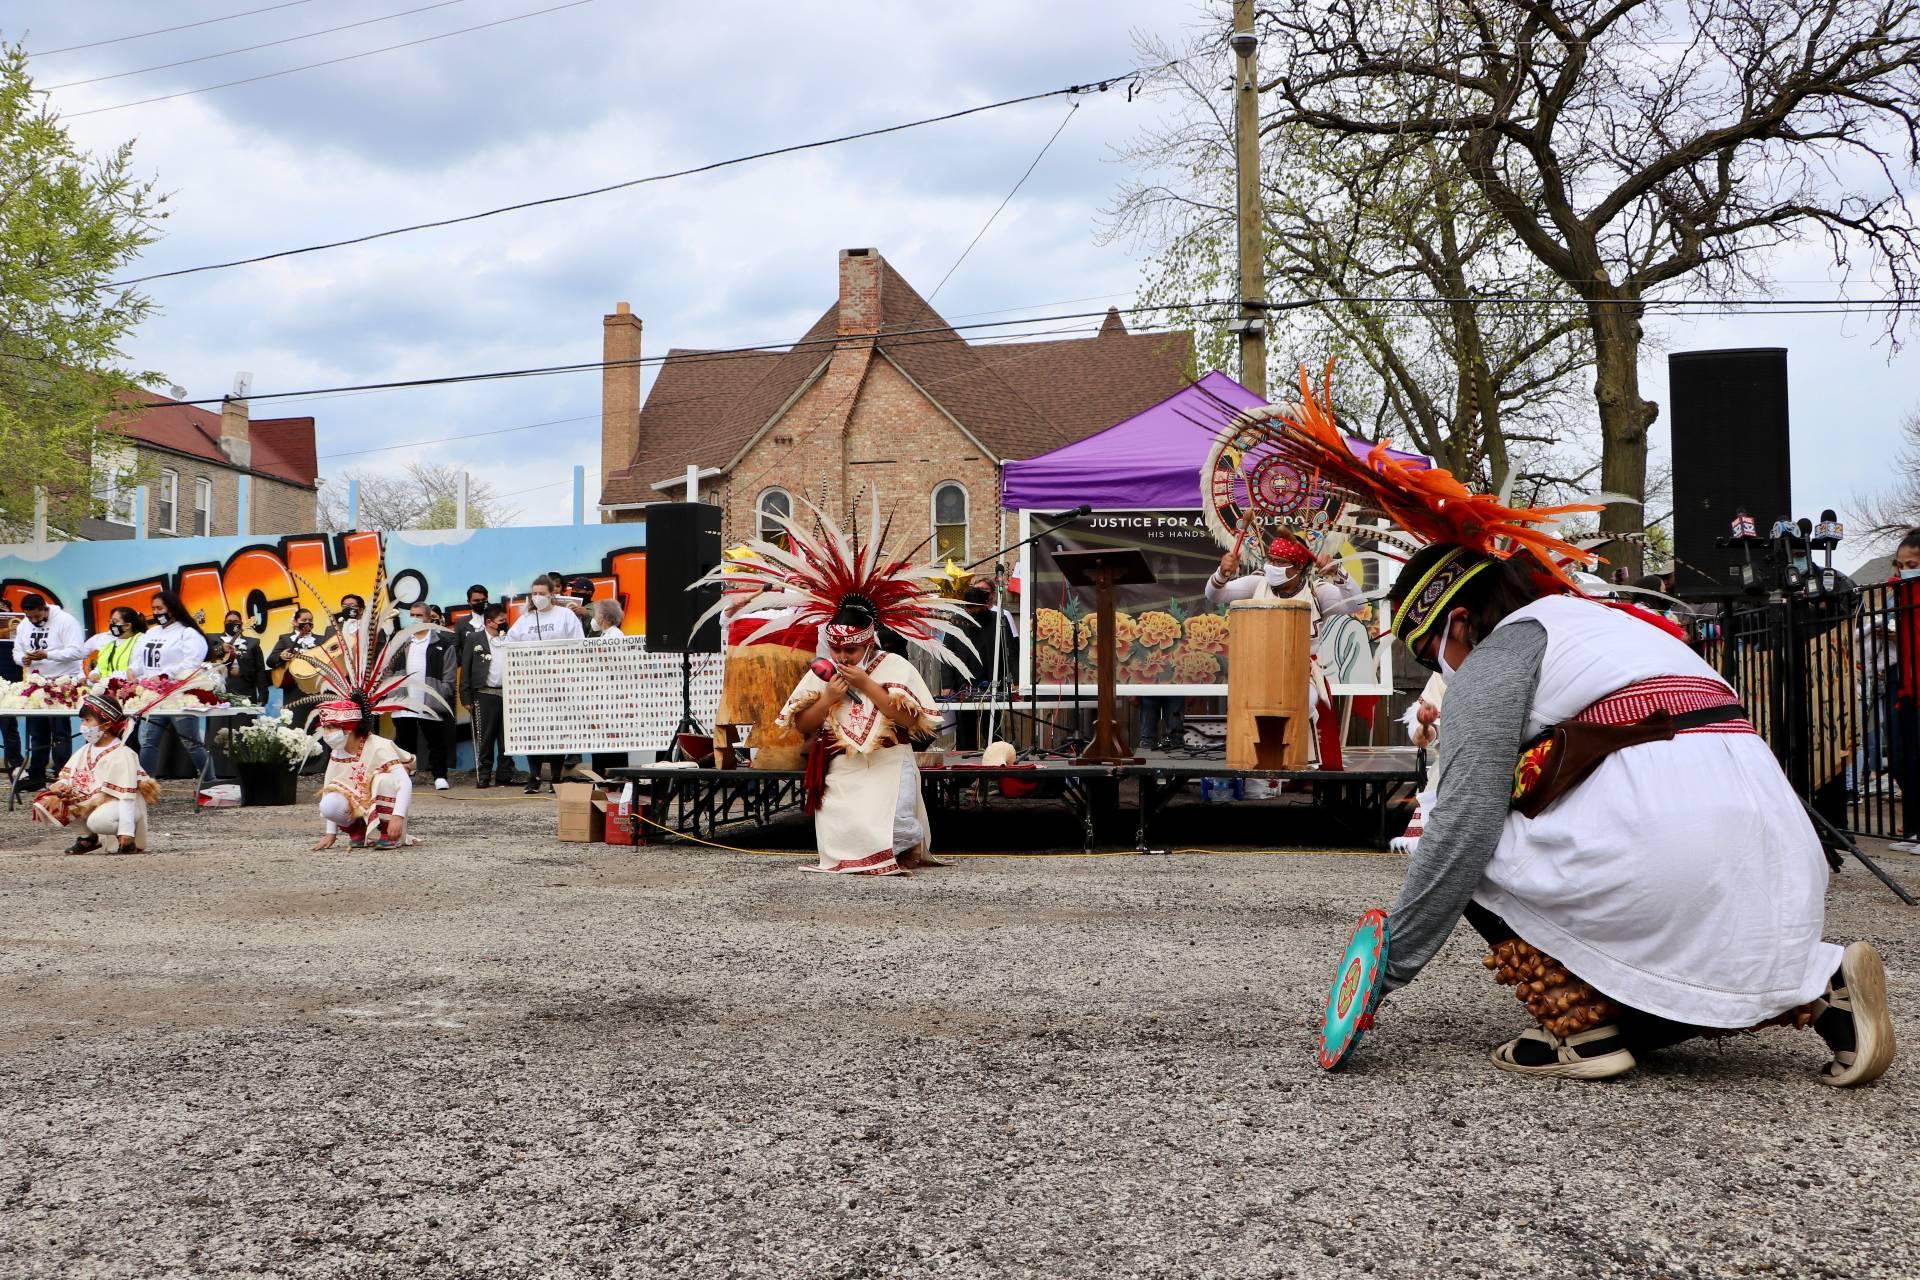 An Aztec dance is performed at the opening of a peace walk on April 18, 2021 for 13-year-old Adam Toledo, a Little Village resident fatally shot by police on March 29, 2021. (Evan Garcia / WTTW News)